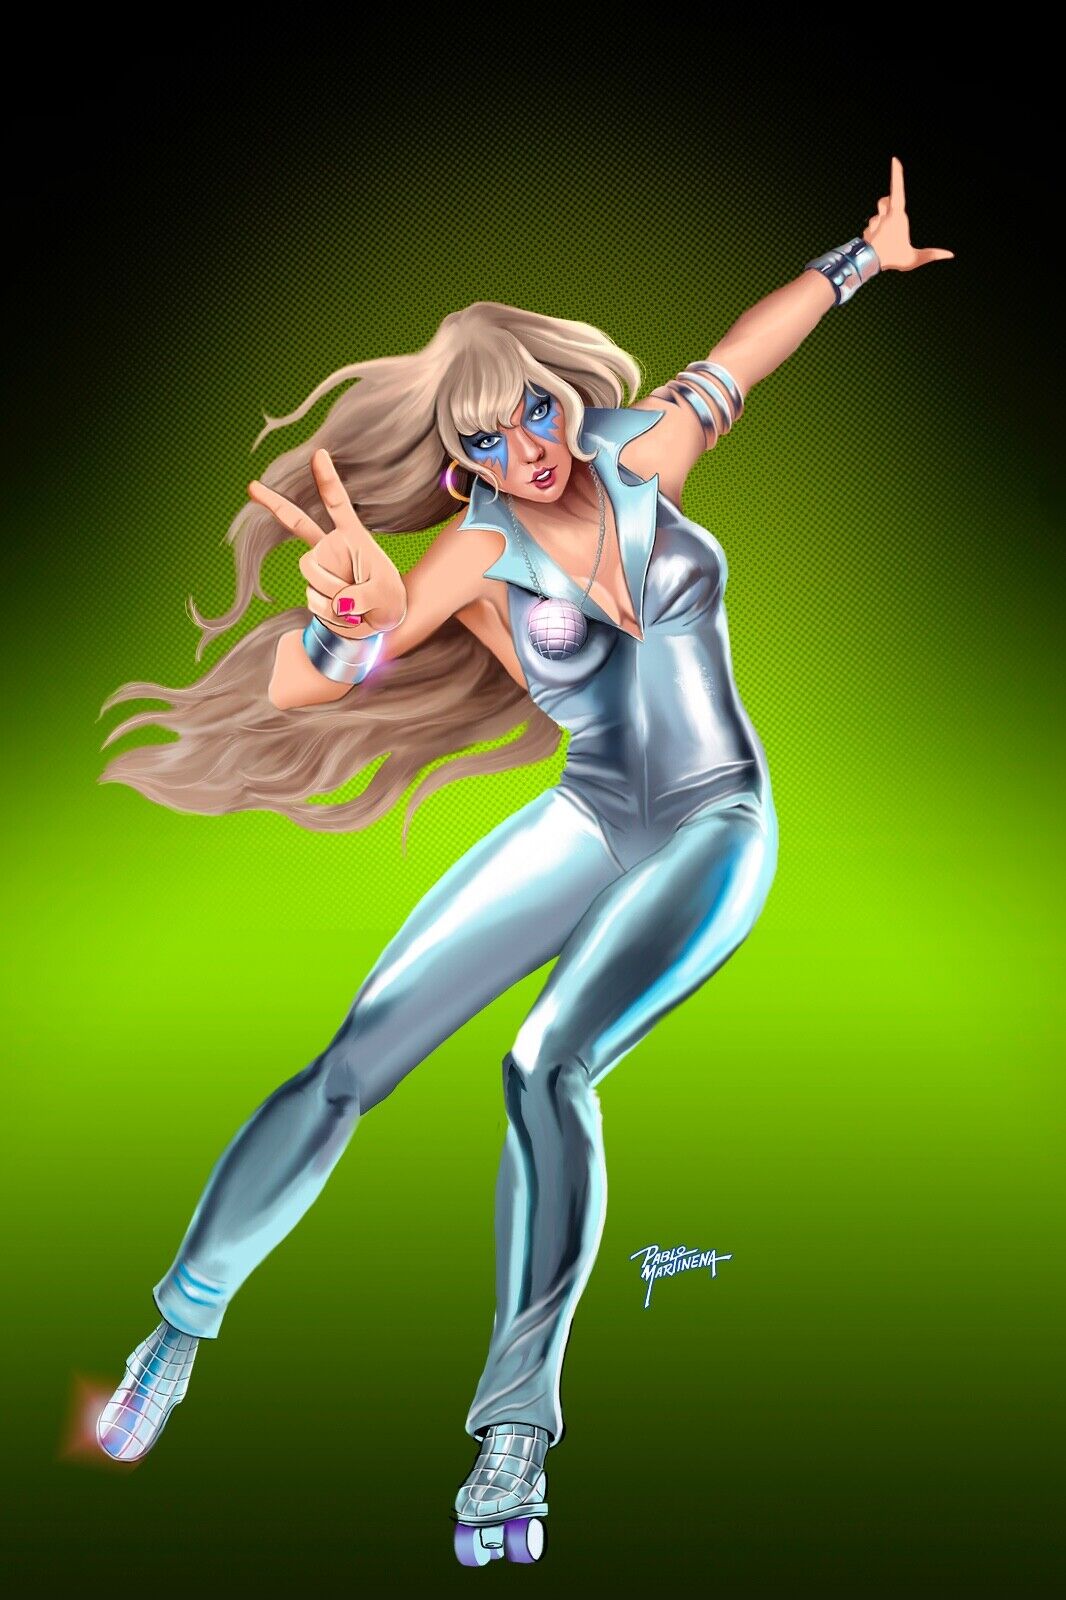 Female Force: Taylor Swift #2 The Sequel comic book SWIFTIES DAZZLER No logos